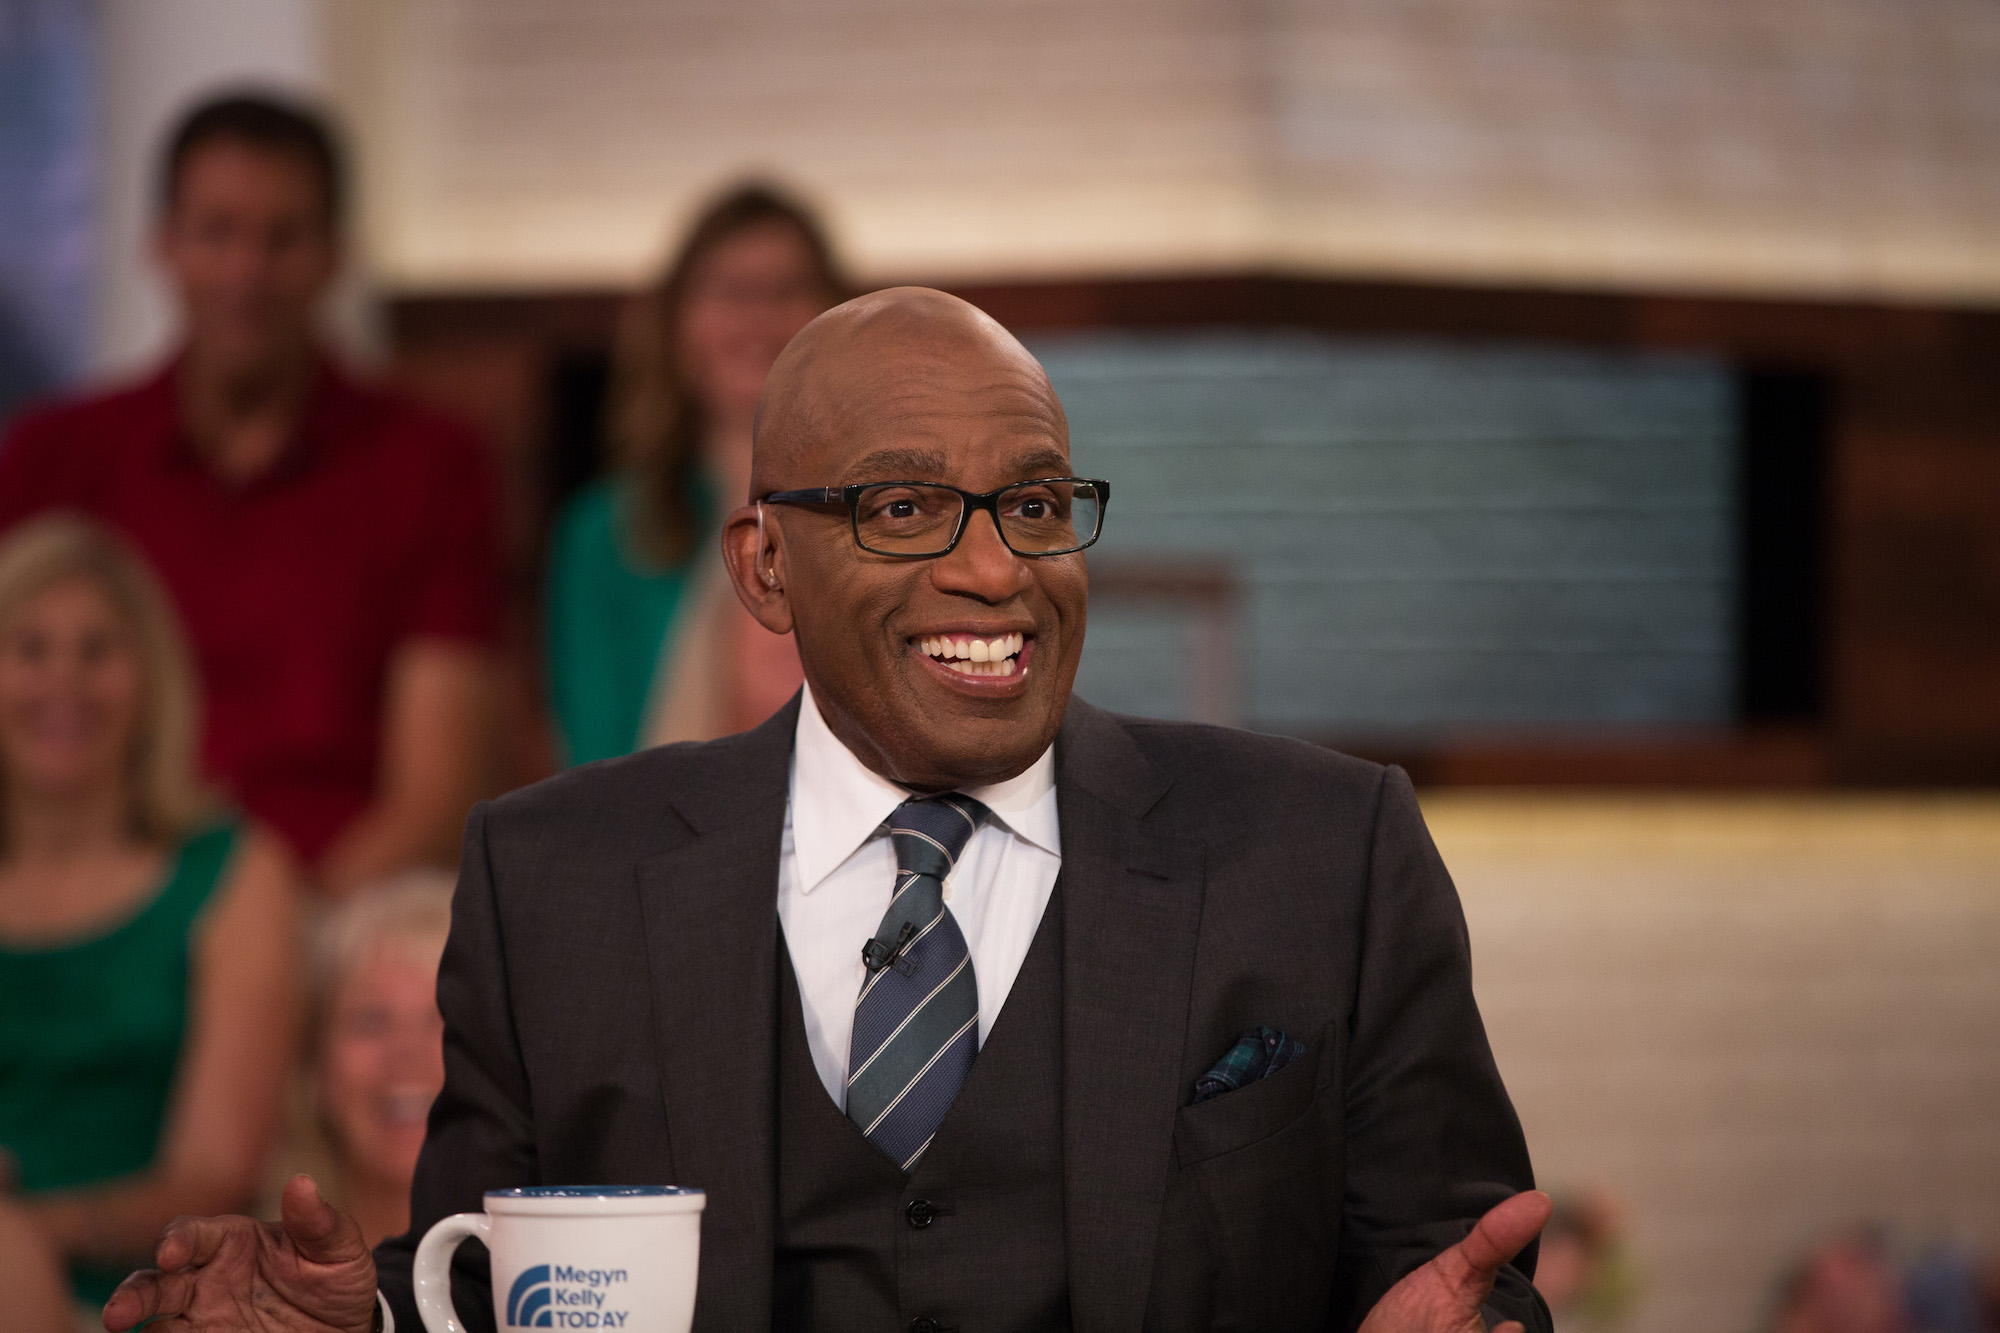 Al Roker smiling, looking to the right